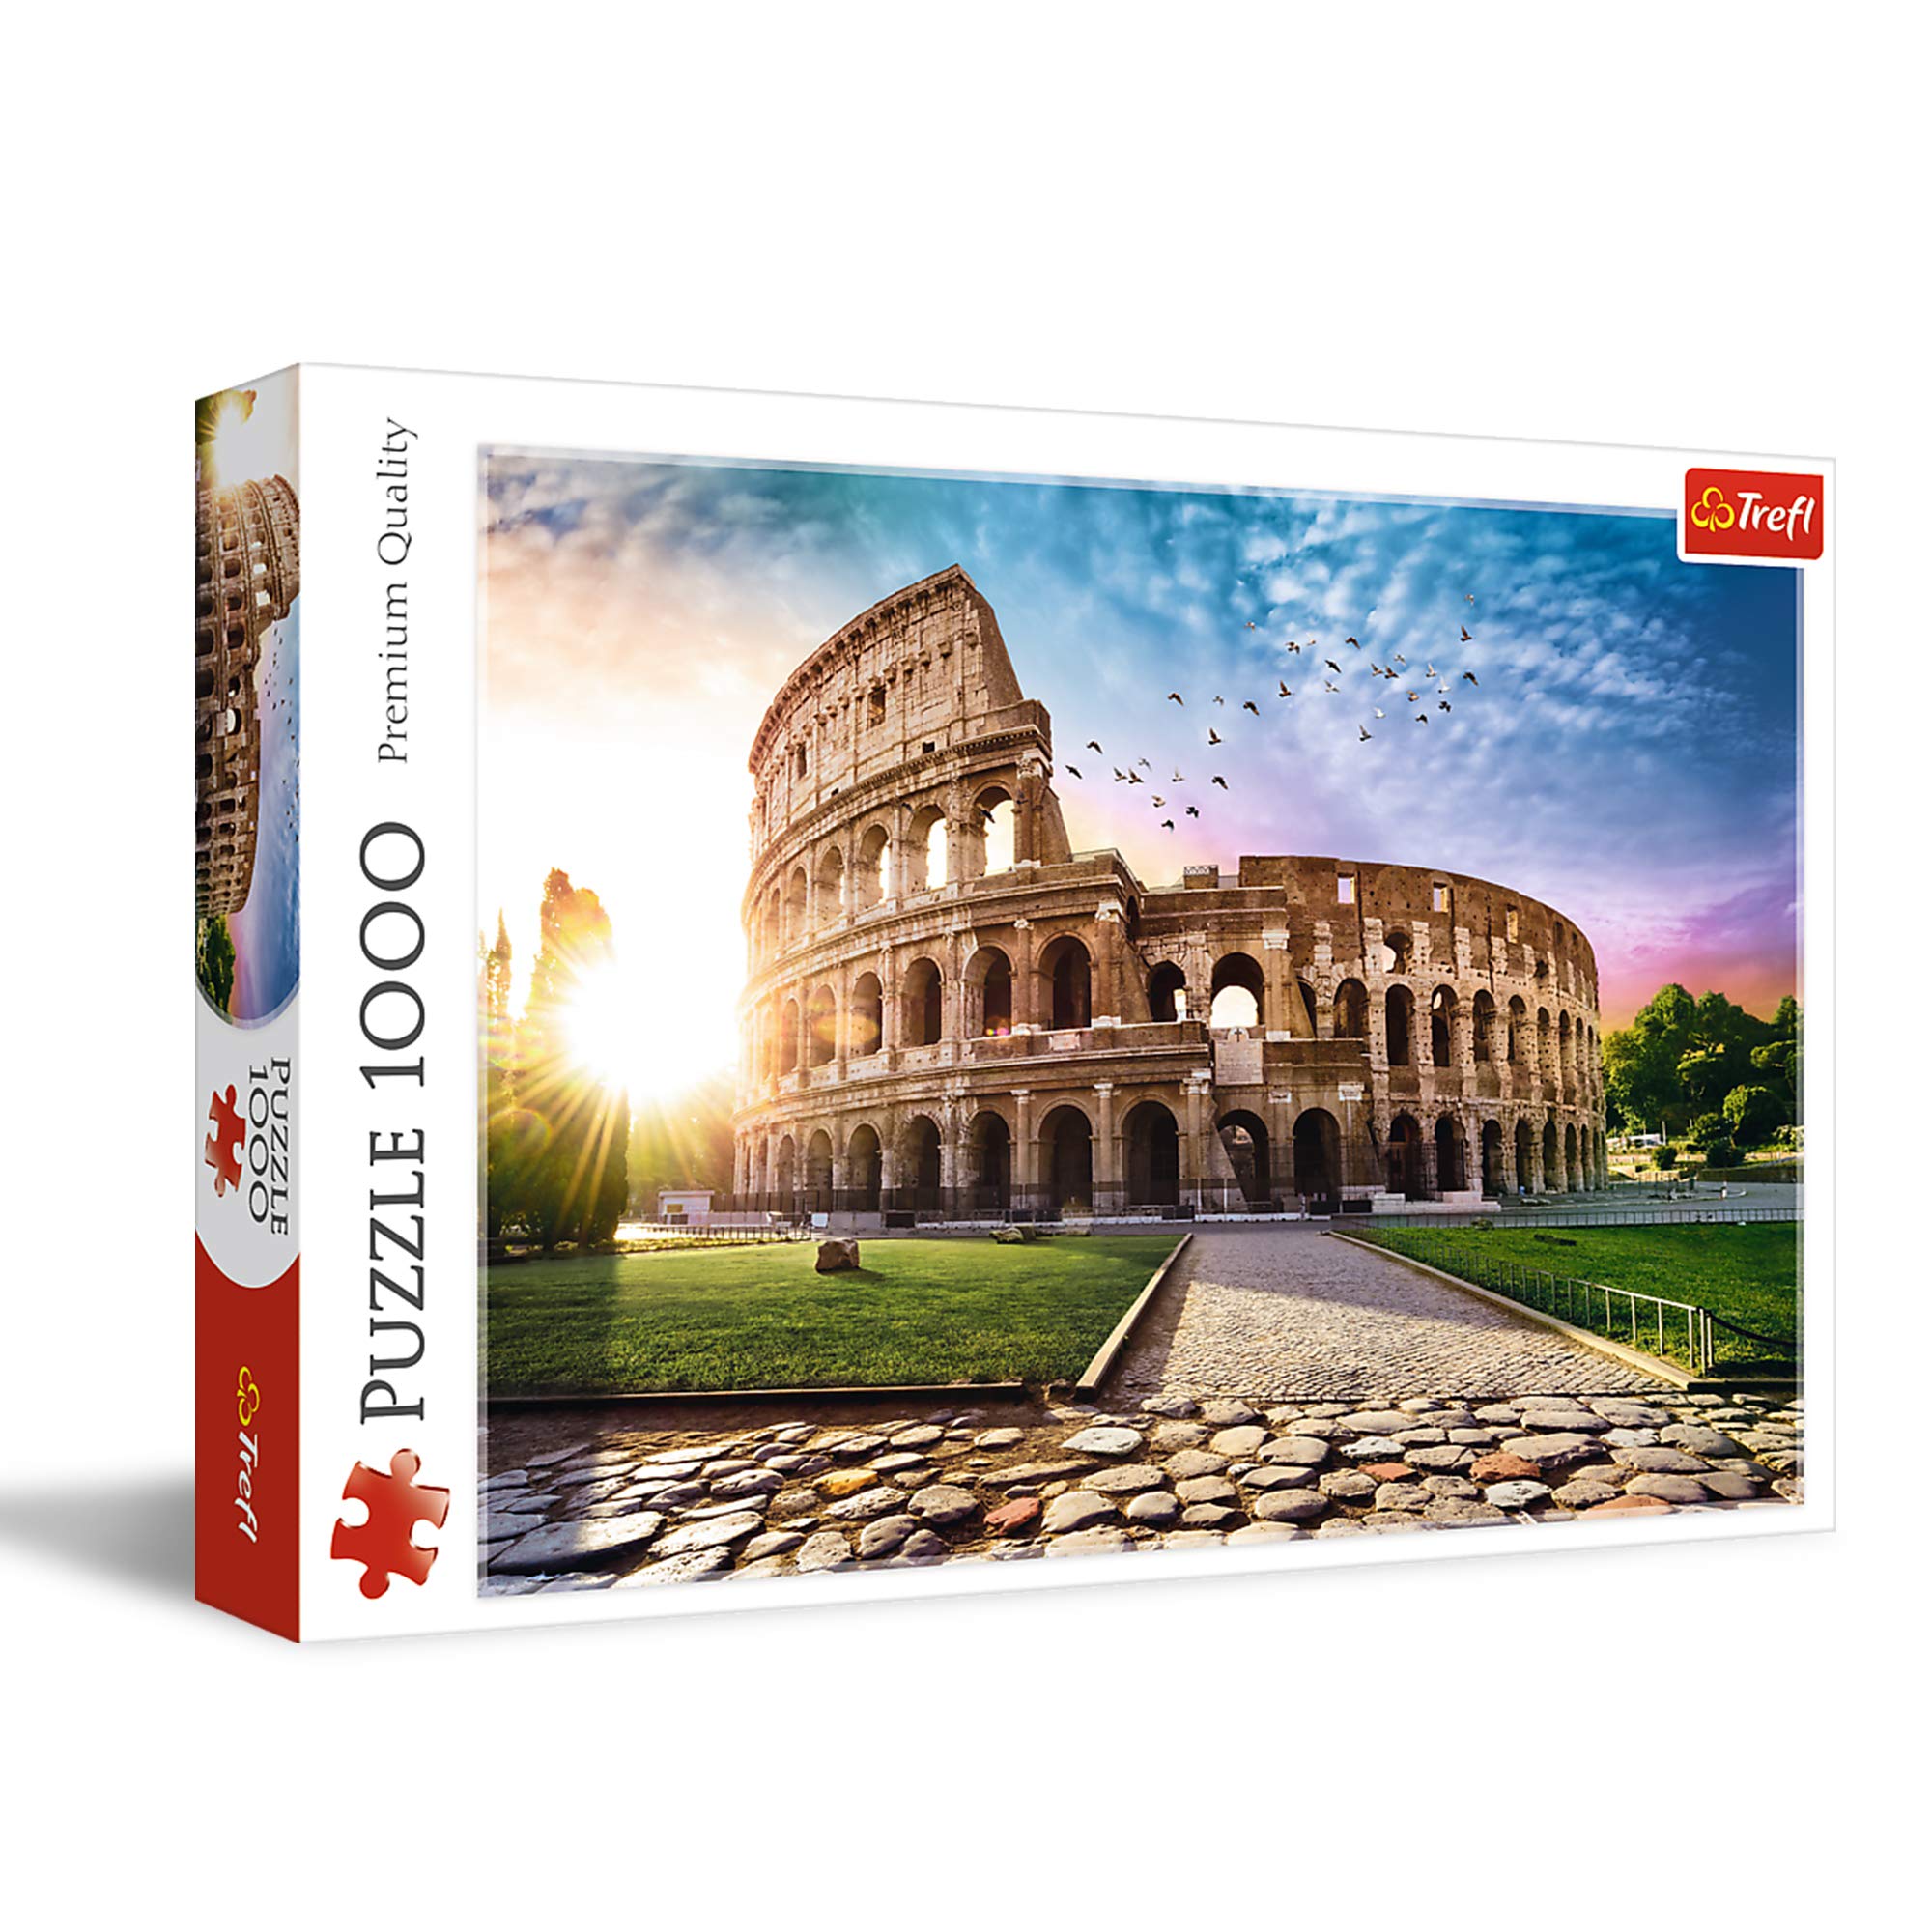 Trefl 1000 Piece Jigsaw Puzzles, Sun-Drenched Colosseum, Rome Italy Puzzle, Historical Monuments, Adult Puzzles, 10468